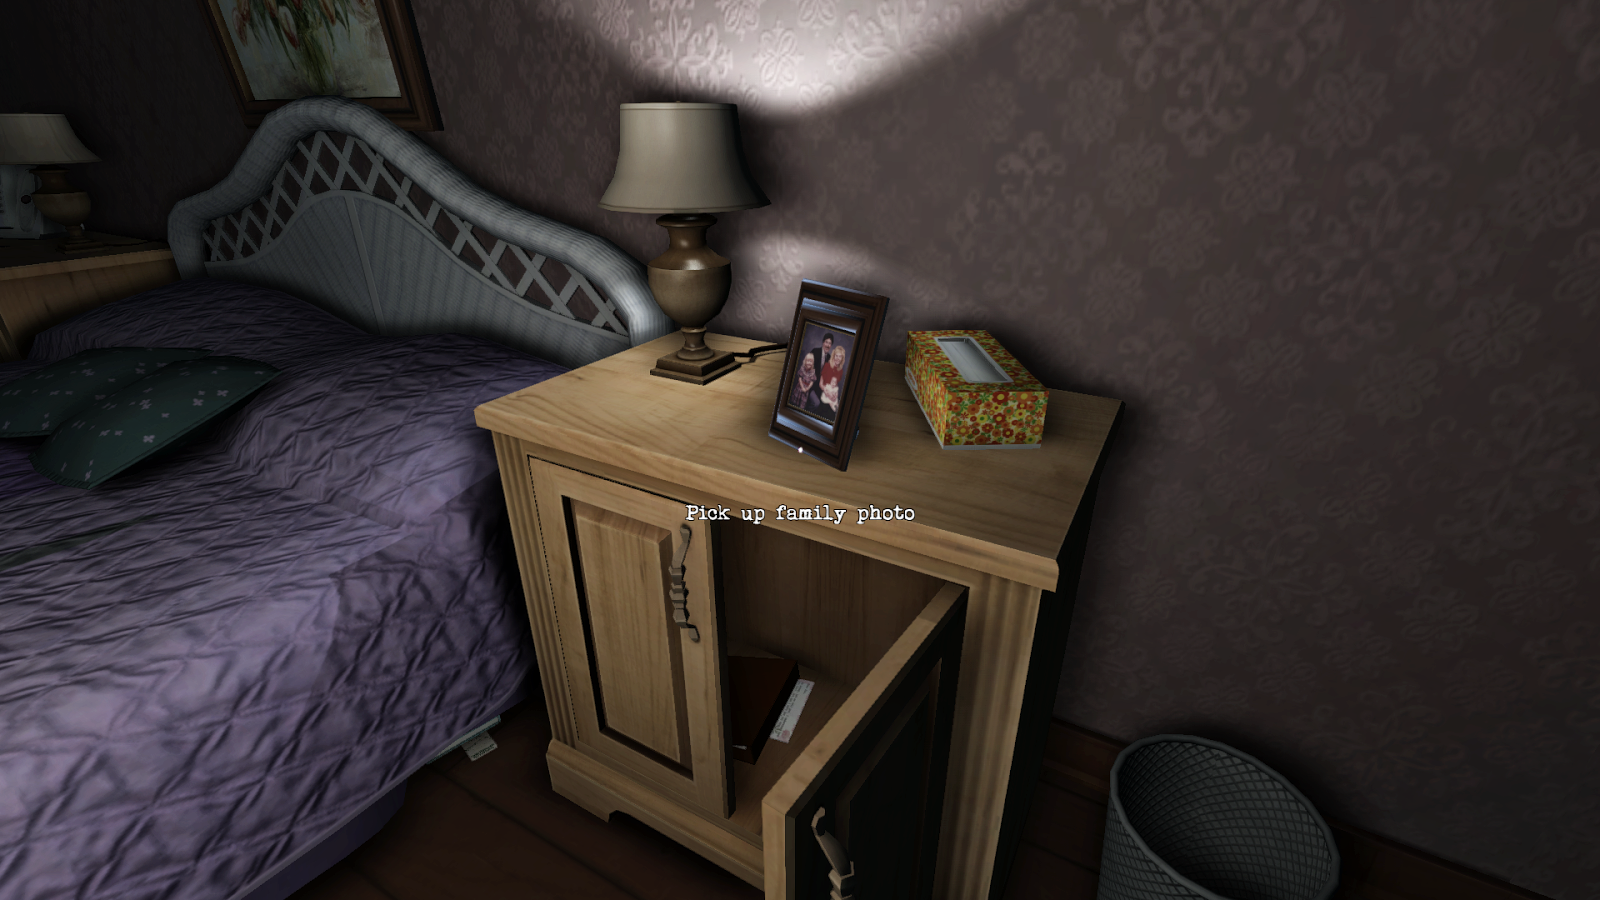 Gone home music. Gone Home игра. Gone Home ps4. Gone Home геймплей.